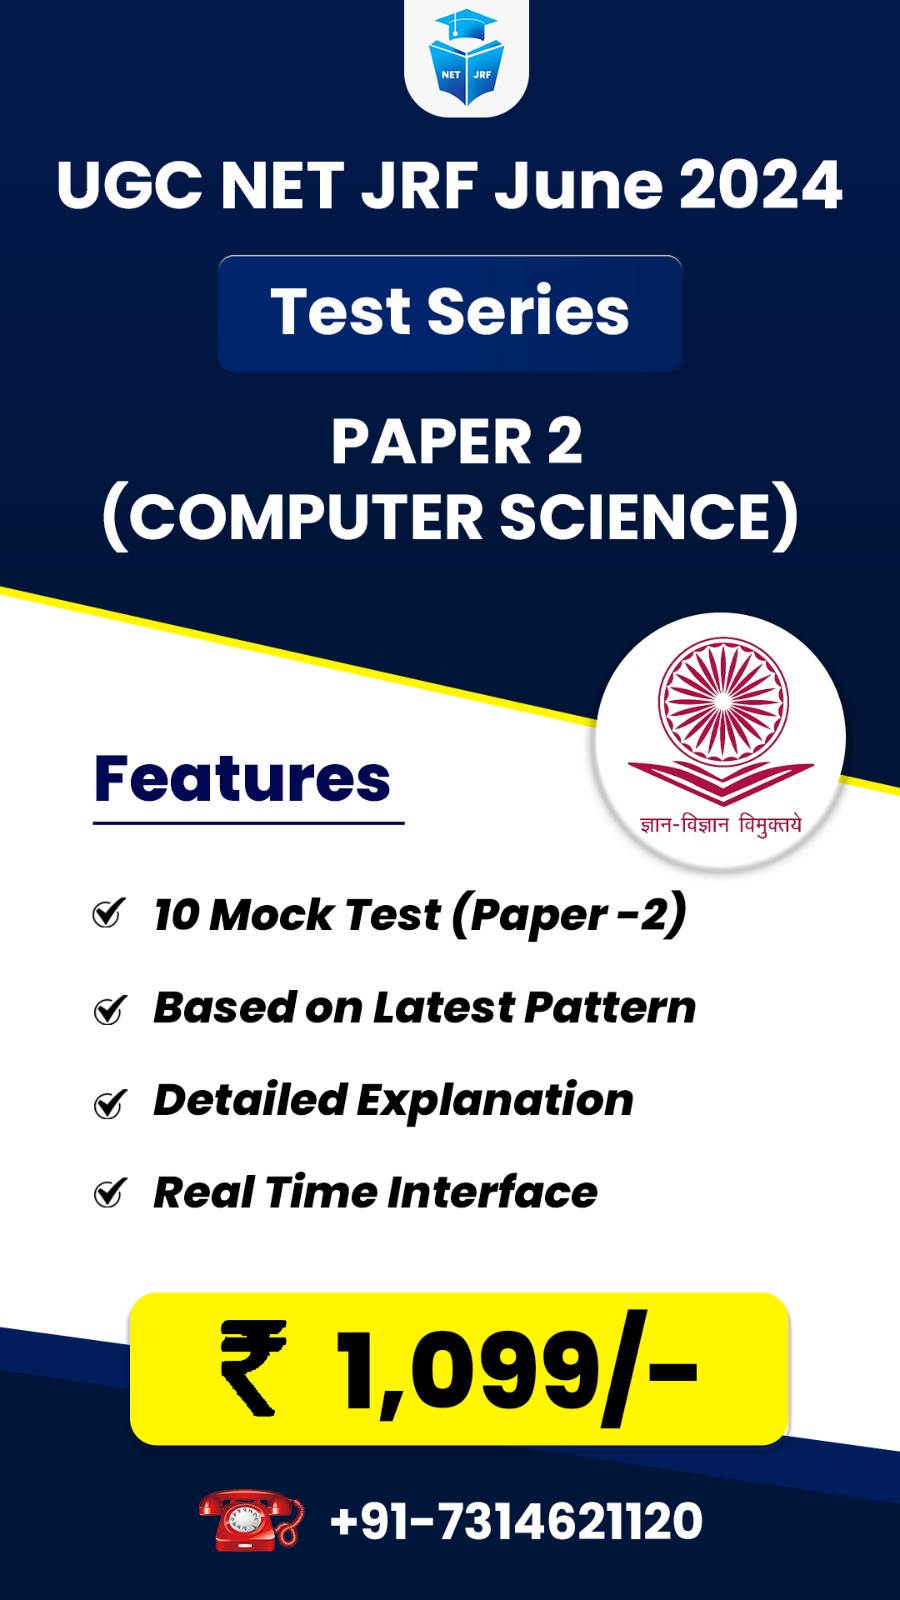 Computer Science (Paper 2) Test Series for June 2024